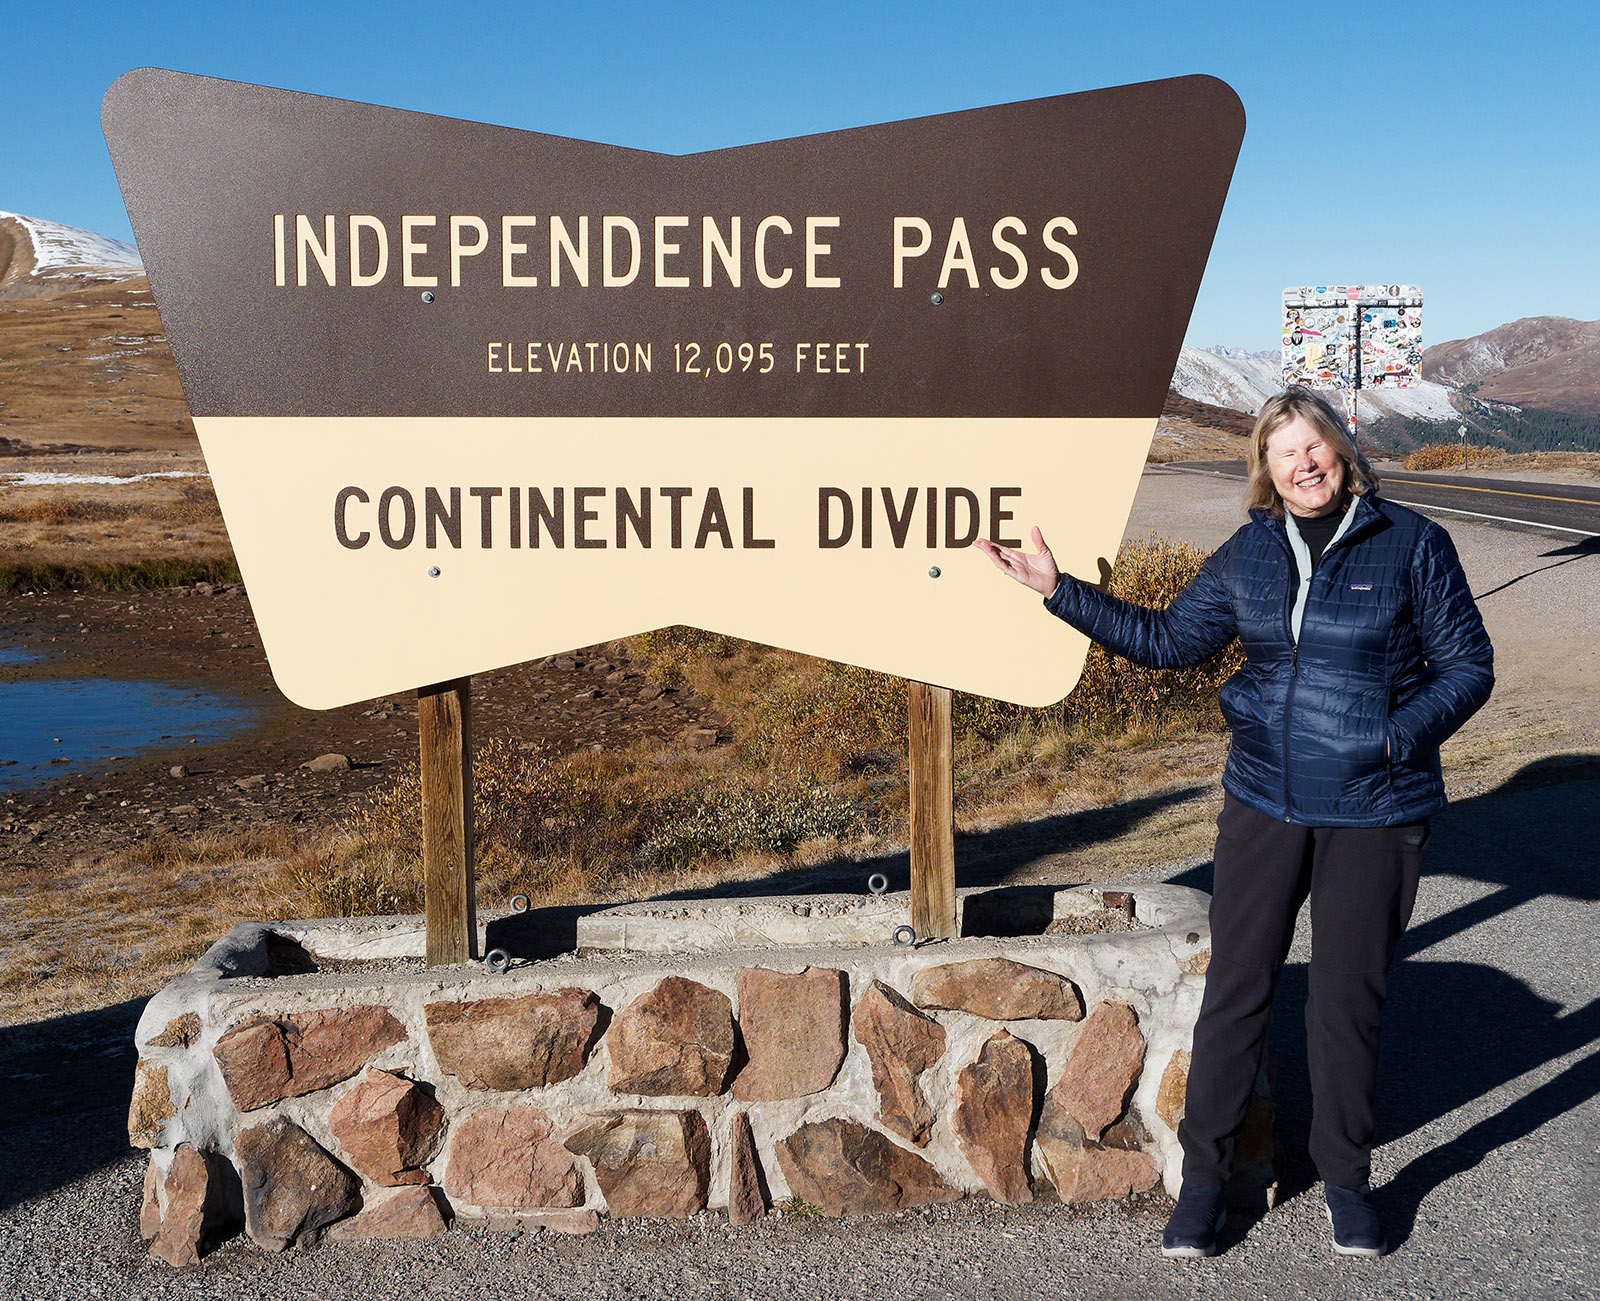 Independence Pass, one of the highest mountain passes in the continental US.